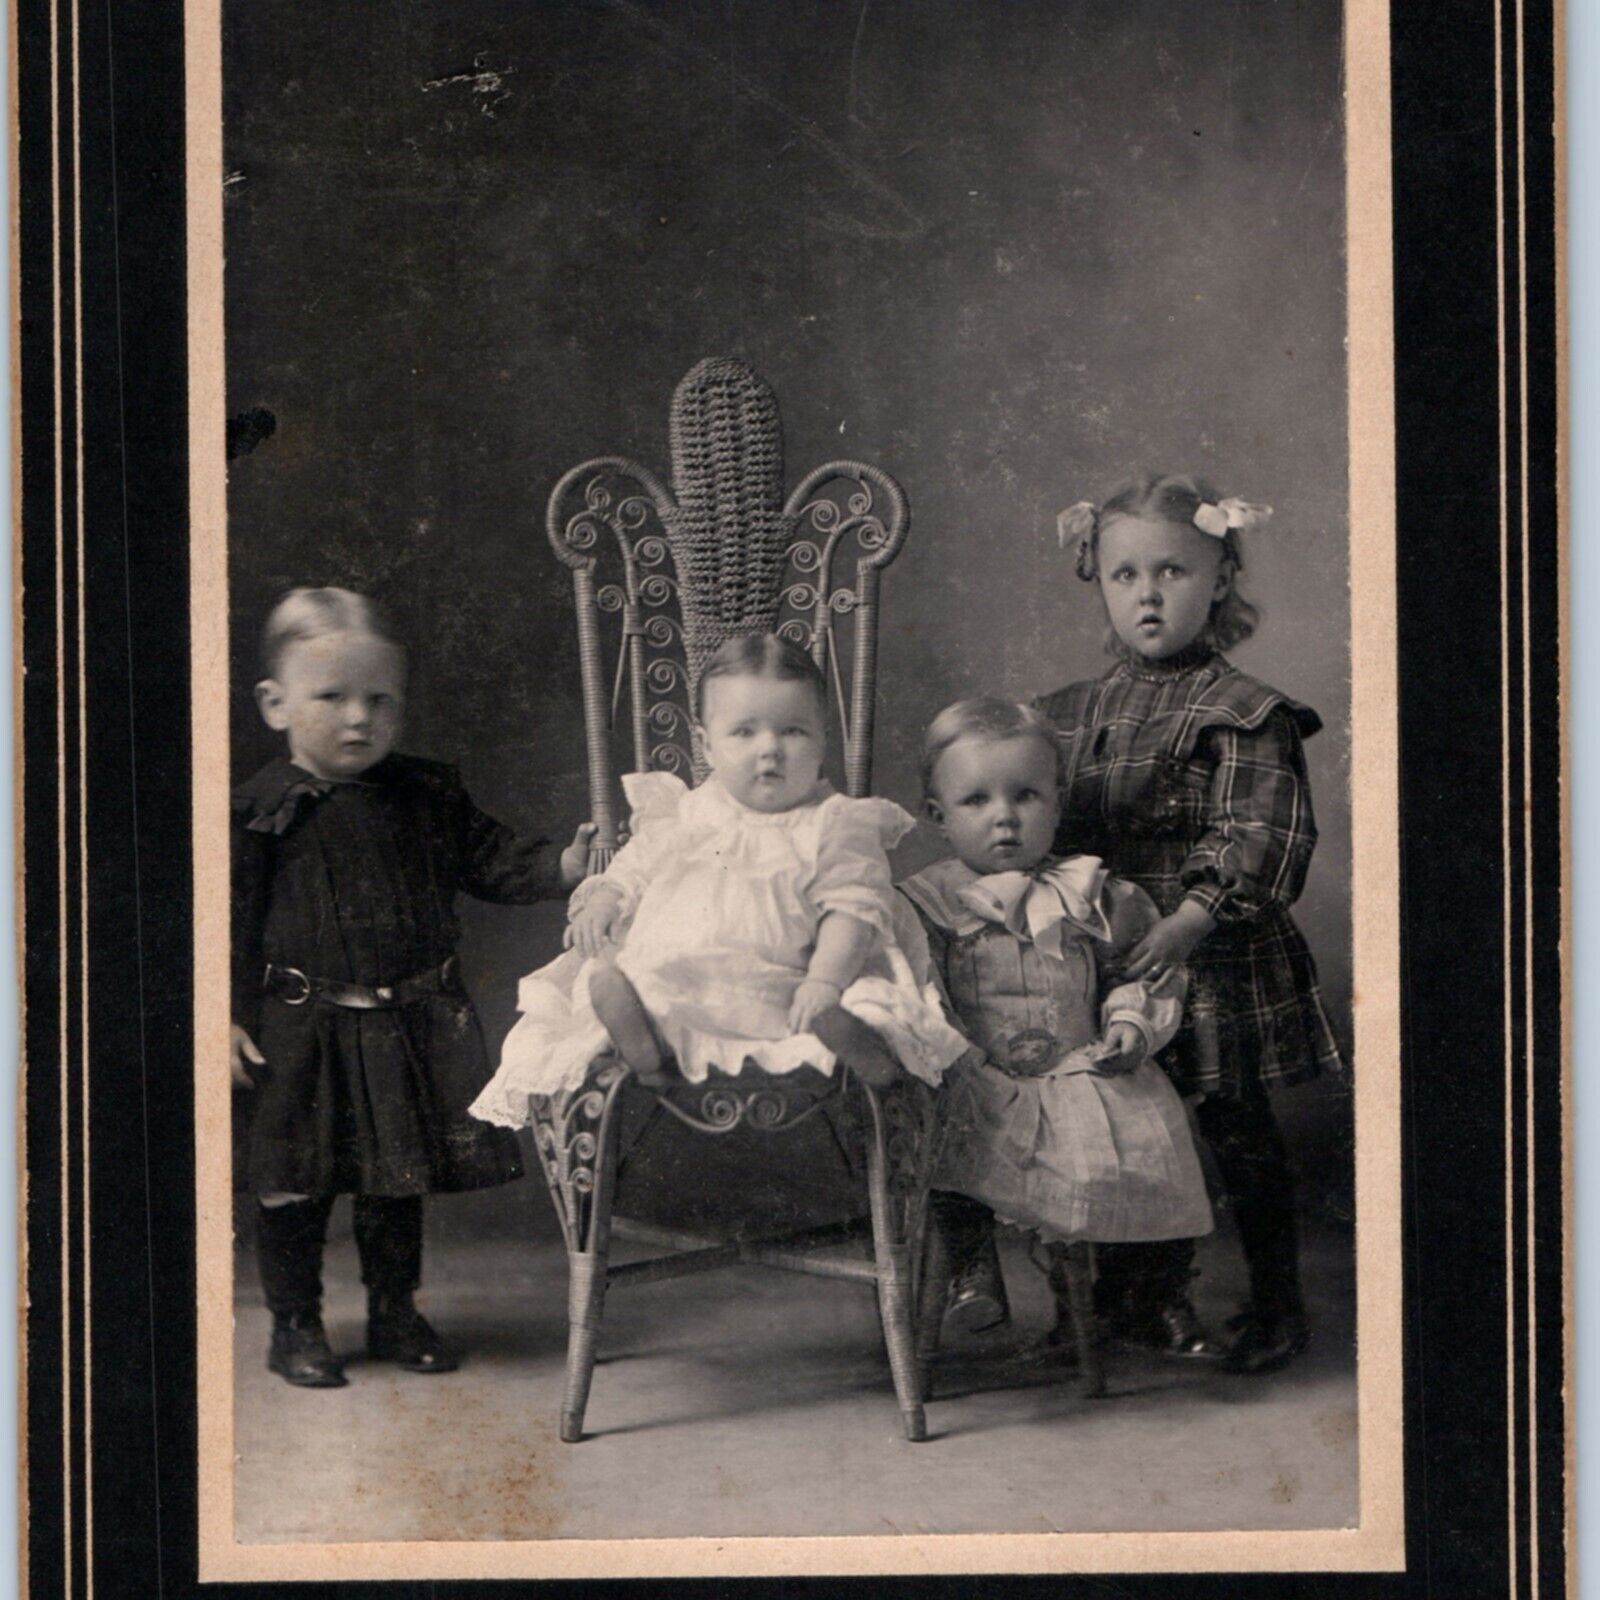 c1900s Adorable Children Siblings Girl & Boys Dresses Cabinet Card Photo Cute 2H